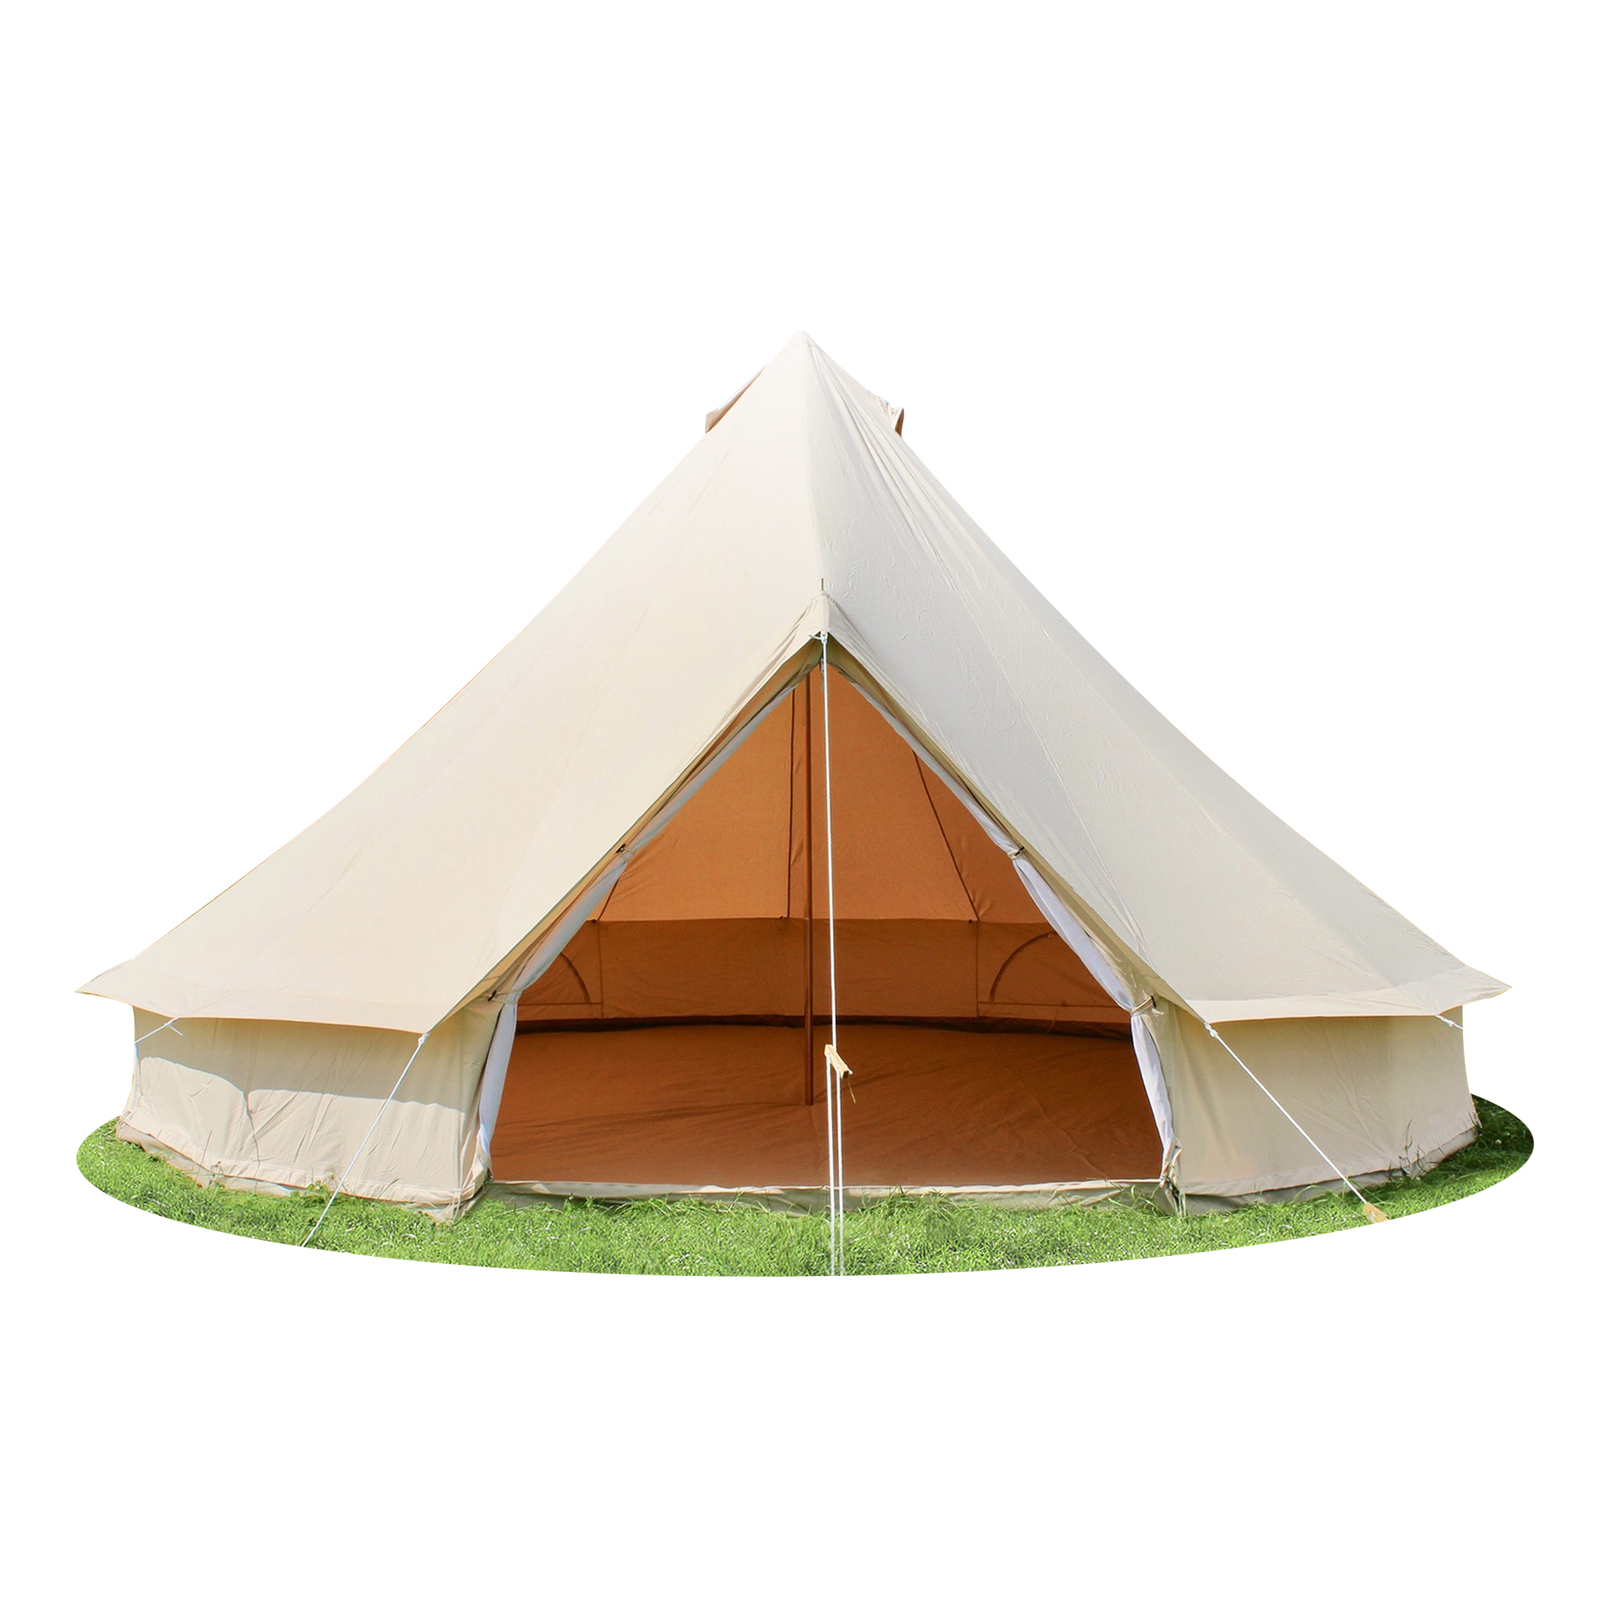 4M 4-Season Bell Tent Waterproof Canvas Glamping Yurt Teepee Tents Commercial Grade Belltent